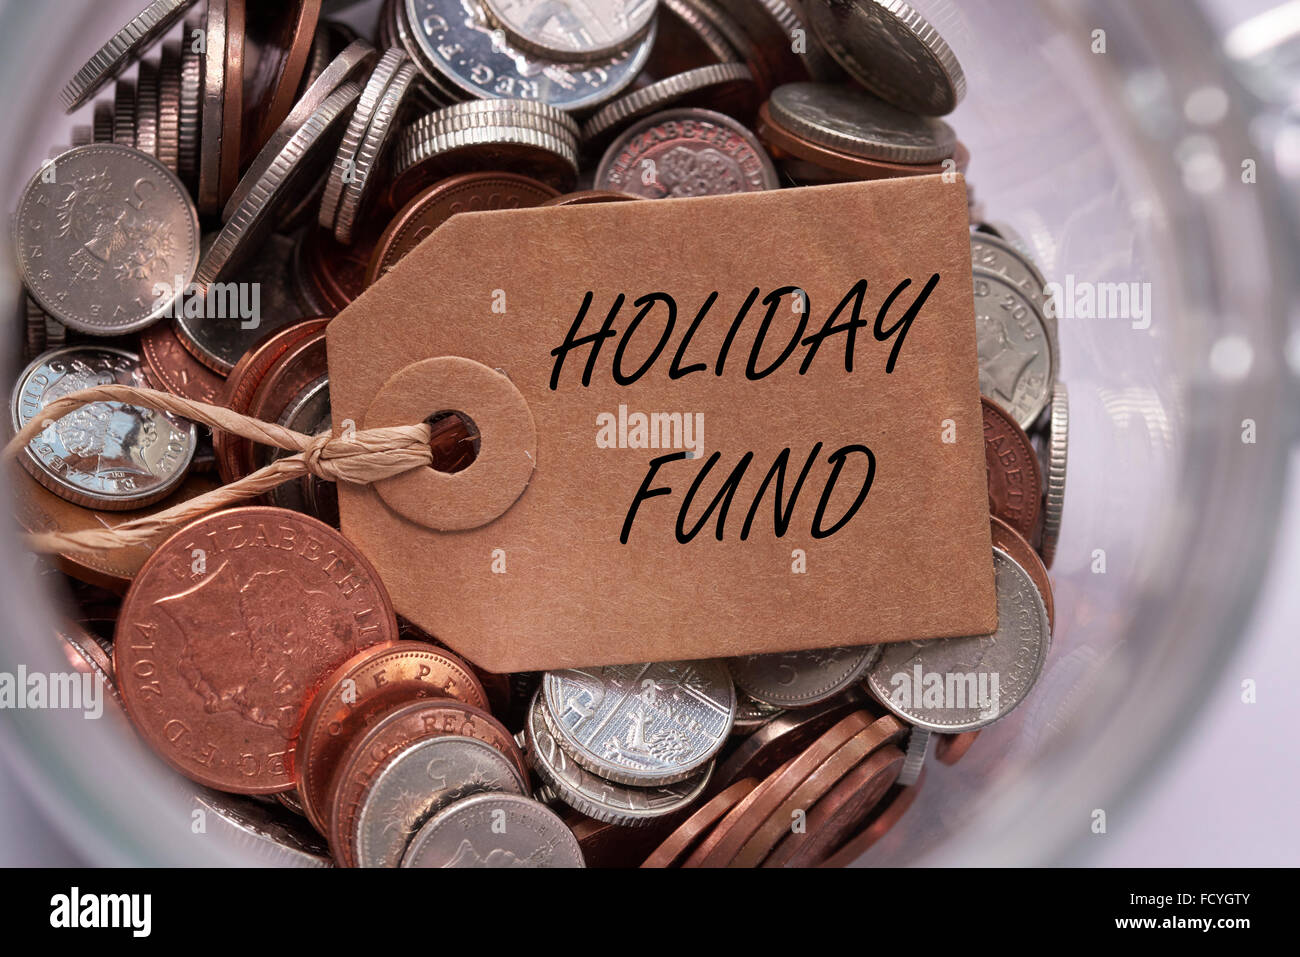 Holiday fund label on British mixed coins inside a glass jar concept Stock Photo